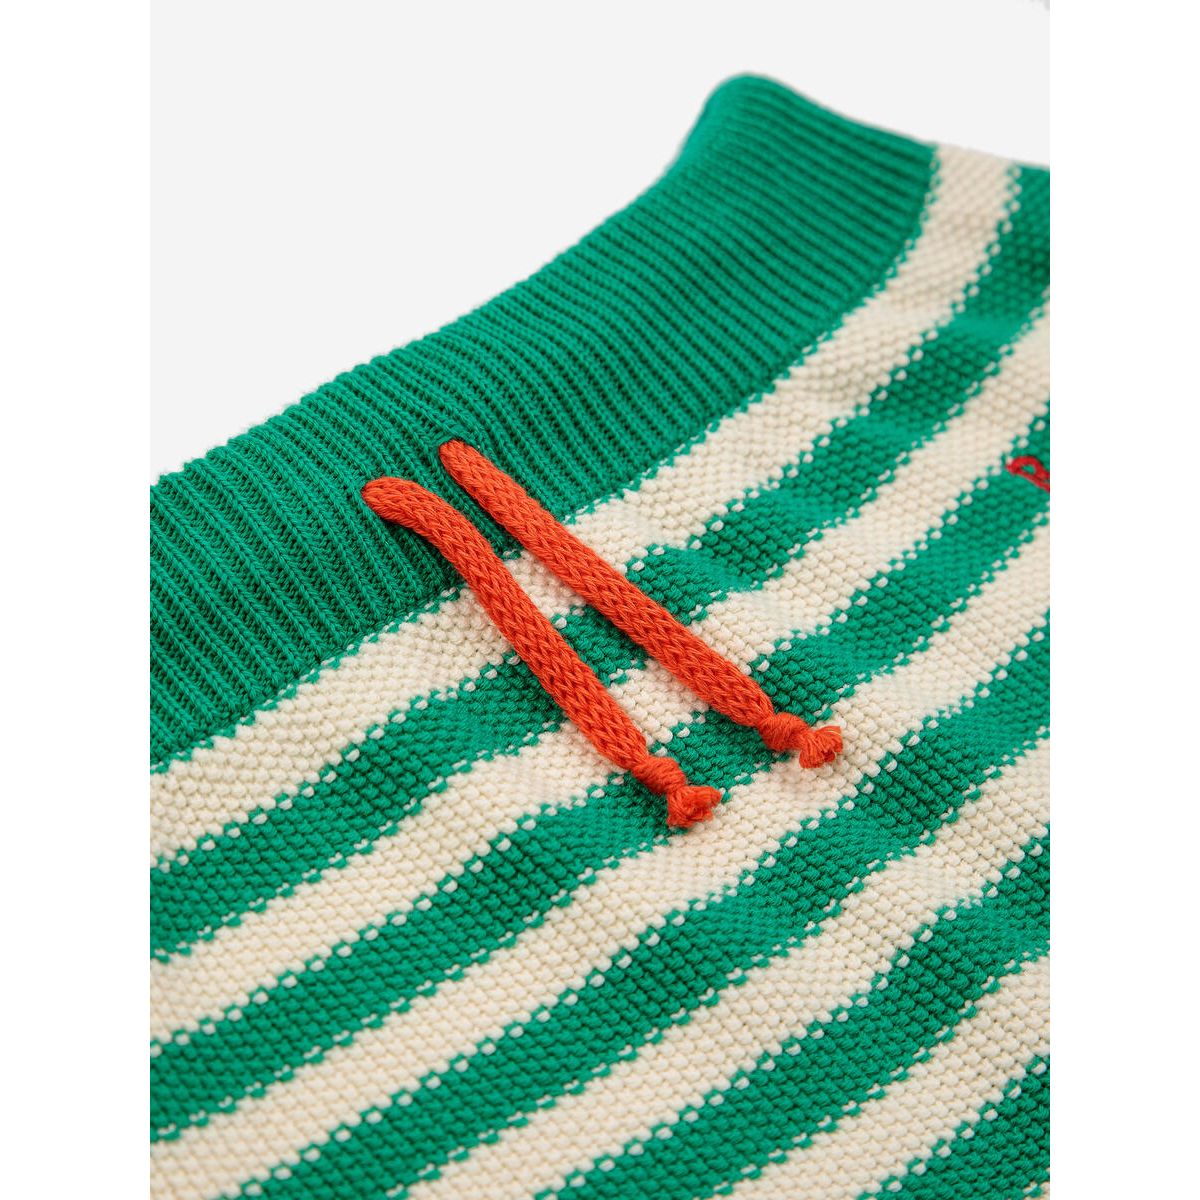 Baby Stripes Knitted Culotte